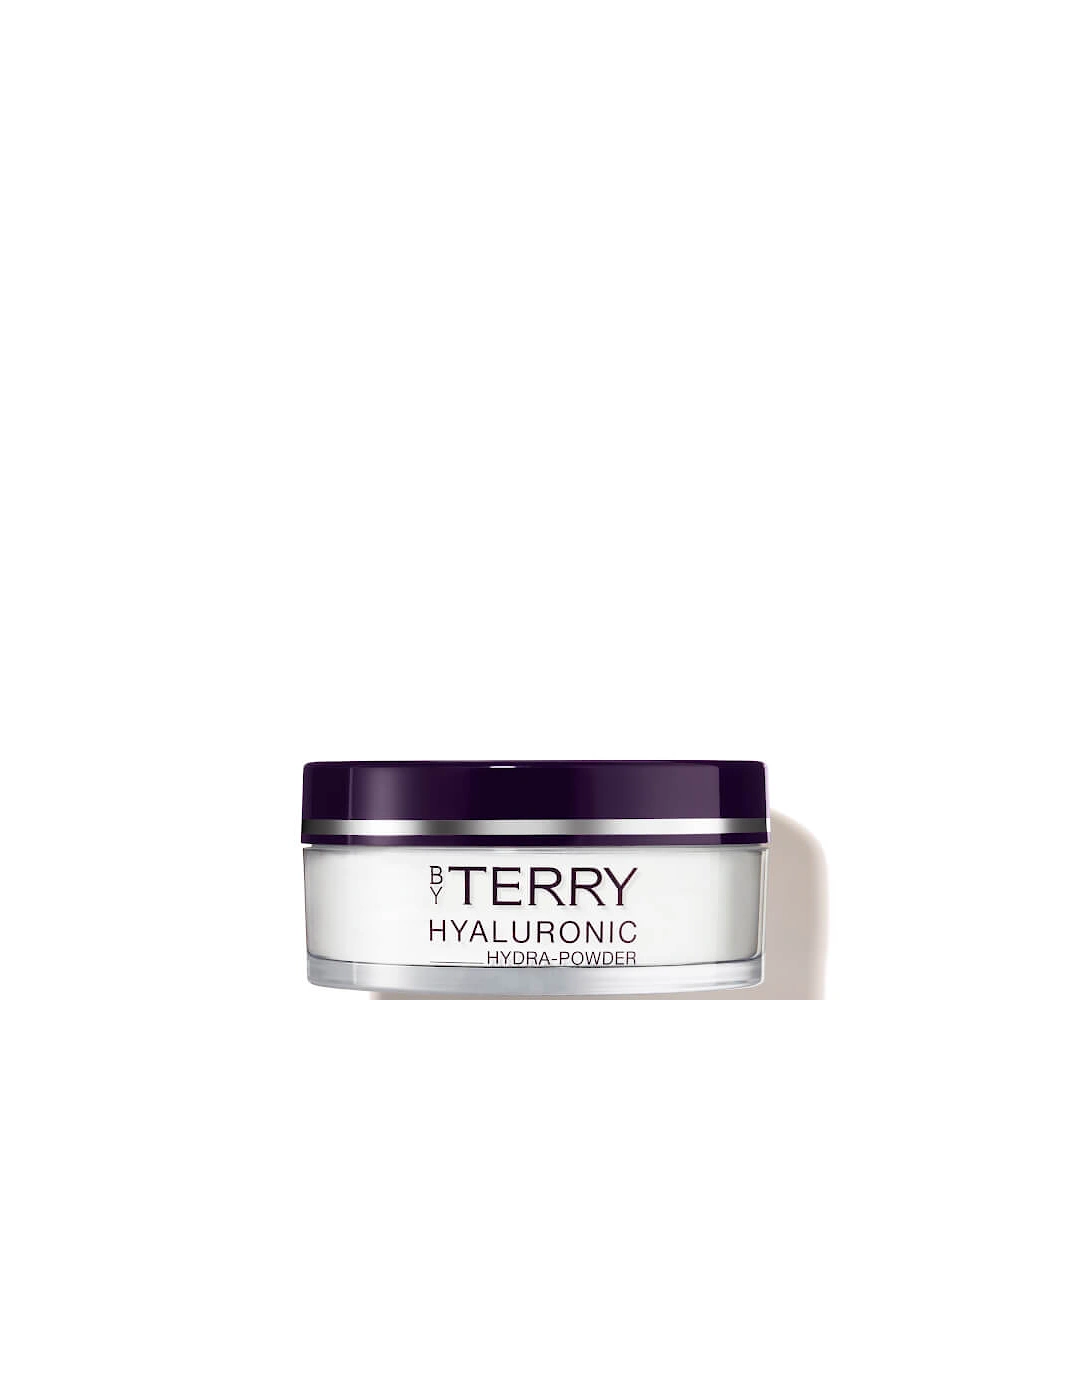 By Terry Hyaluronic Hydra-Powder 10g - By Terry - By Terry Hyaluronic Hydra-Powder 10g - shirley - By Terry Hyaluronic Hydra-Powder 10g - Lucia - By Terry Hyaluronic Hydra-Powder 15g - Mel, 2 of 1